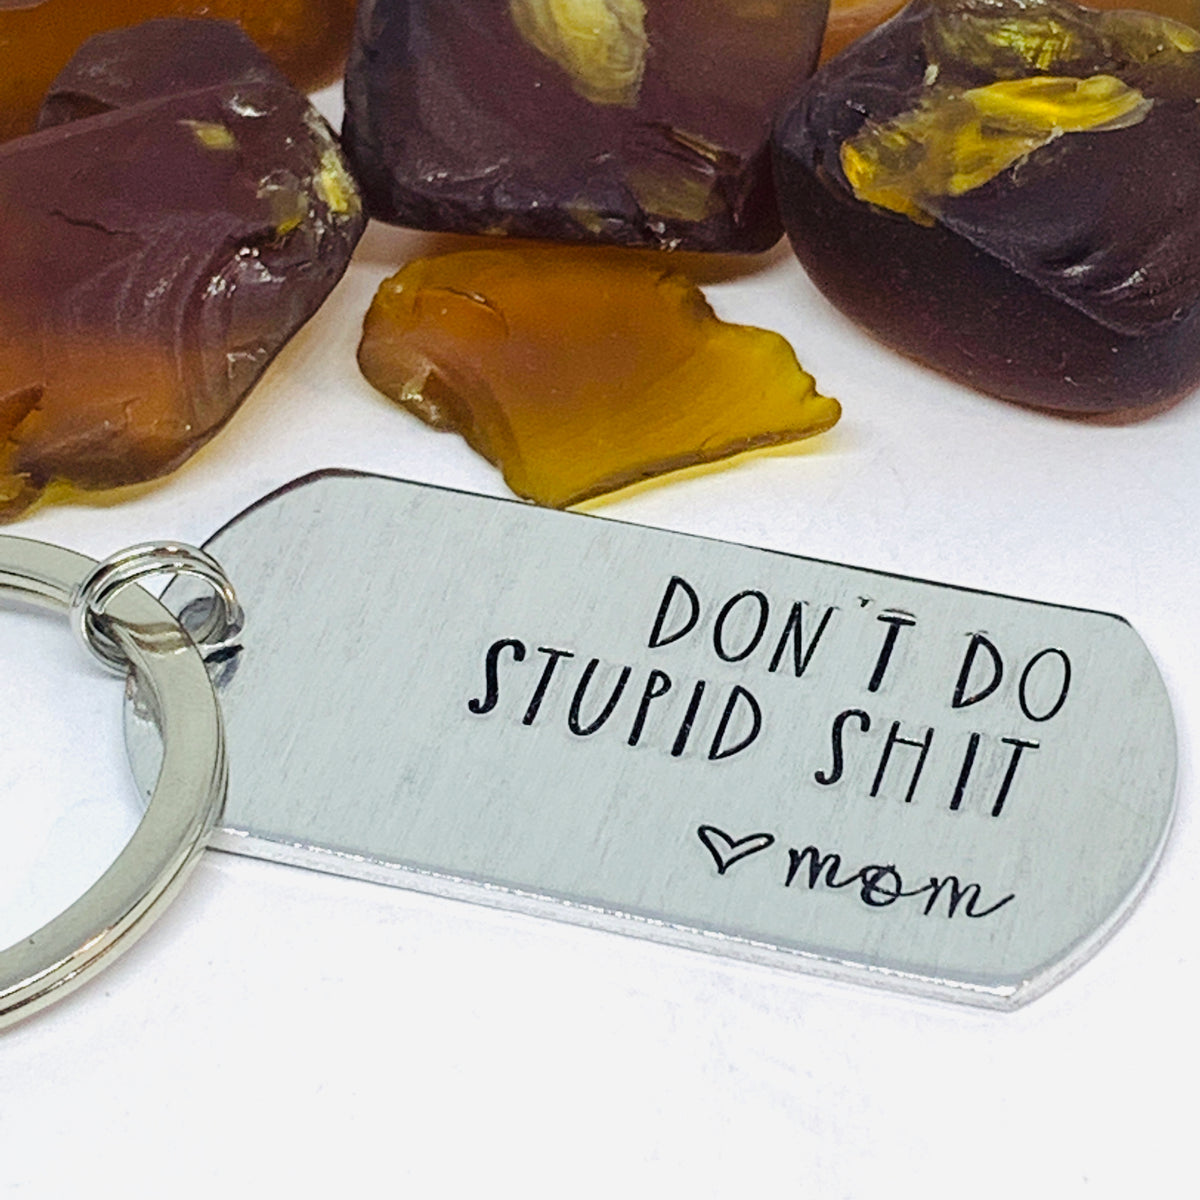 Don't do stupid shit love Mom, Funny Gift for Your Kids. – Just A